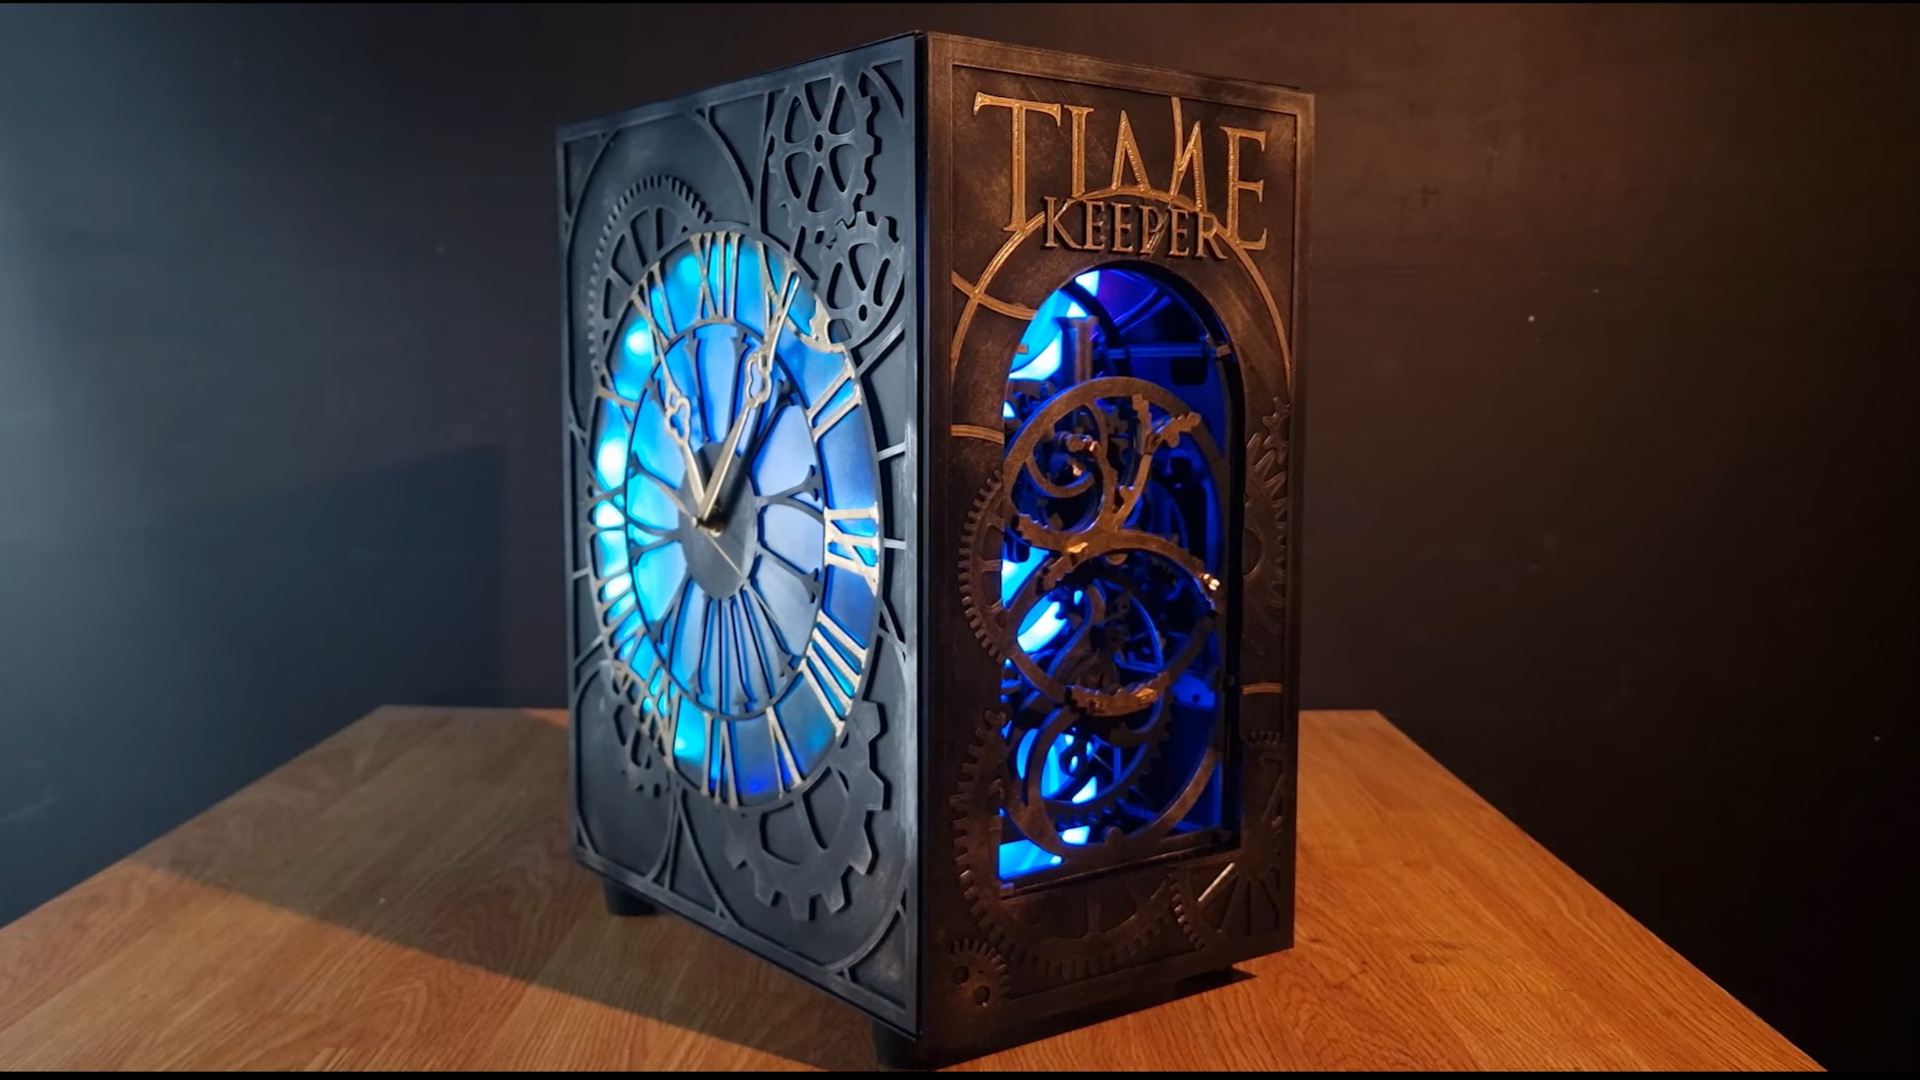 This stunning clock PC build is inspired by adventure game Syberia